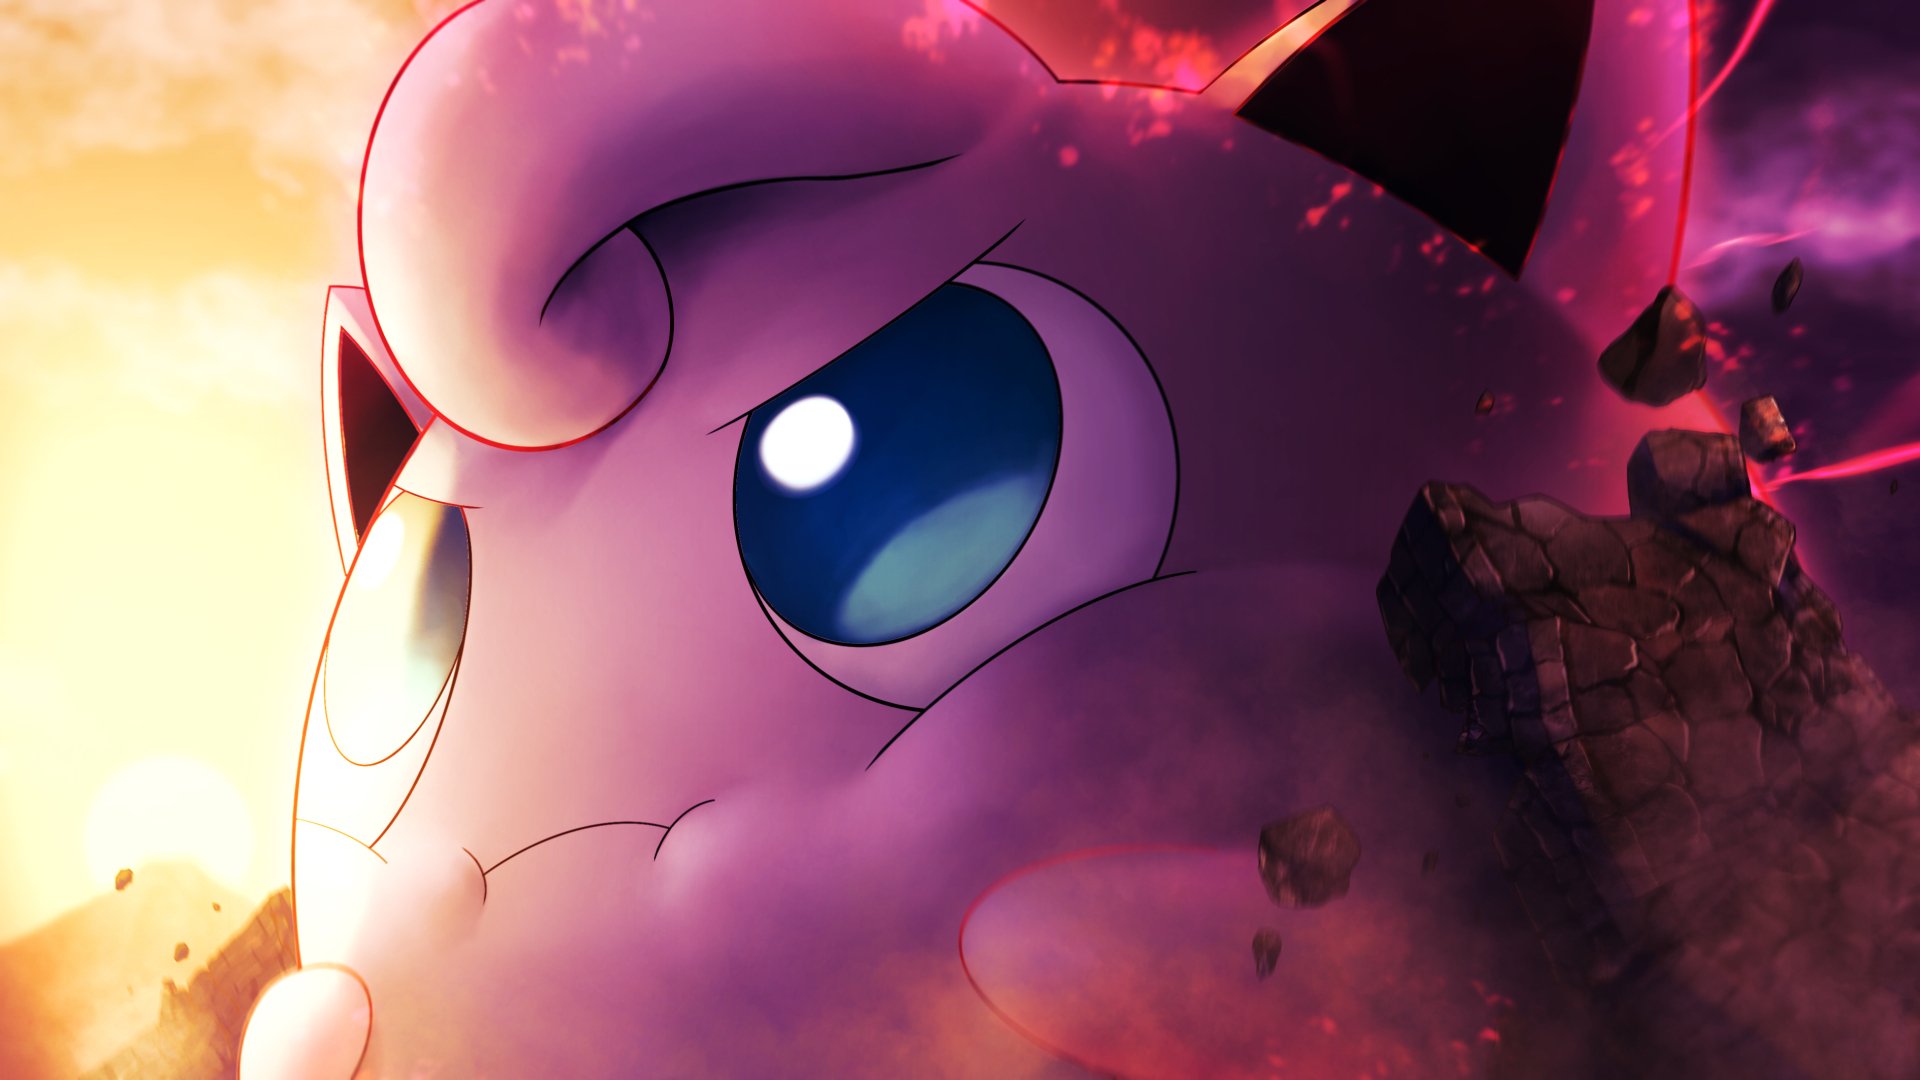 3780x2126 Puffed Up Angry Jigglypuff by Higawind Wallpaper Background Image...